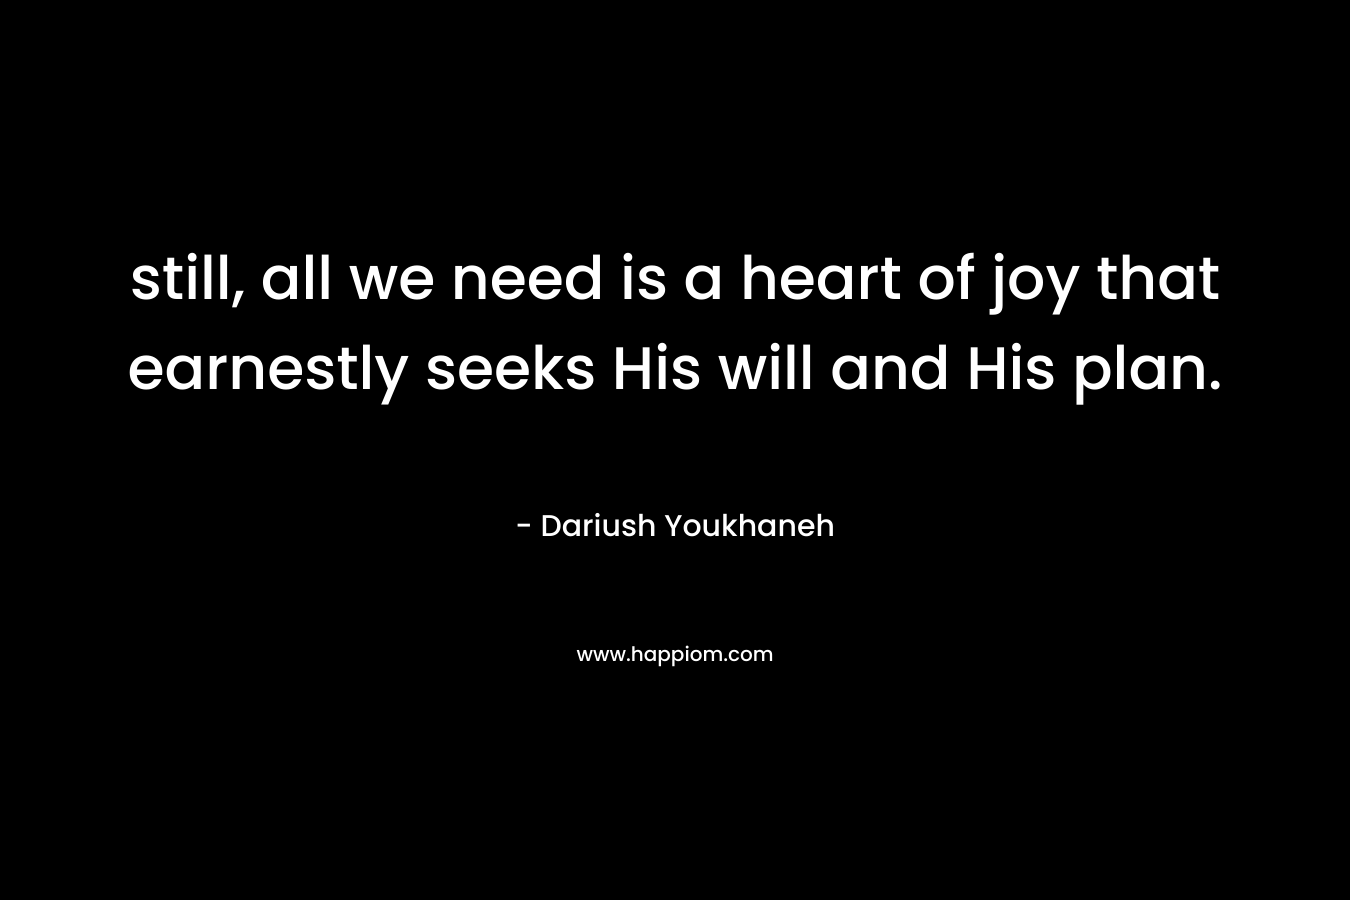 still, all we need is a heart of joy that earnestly seeks His will and His plan.